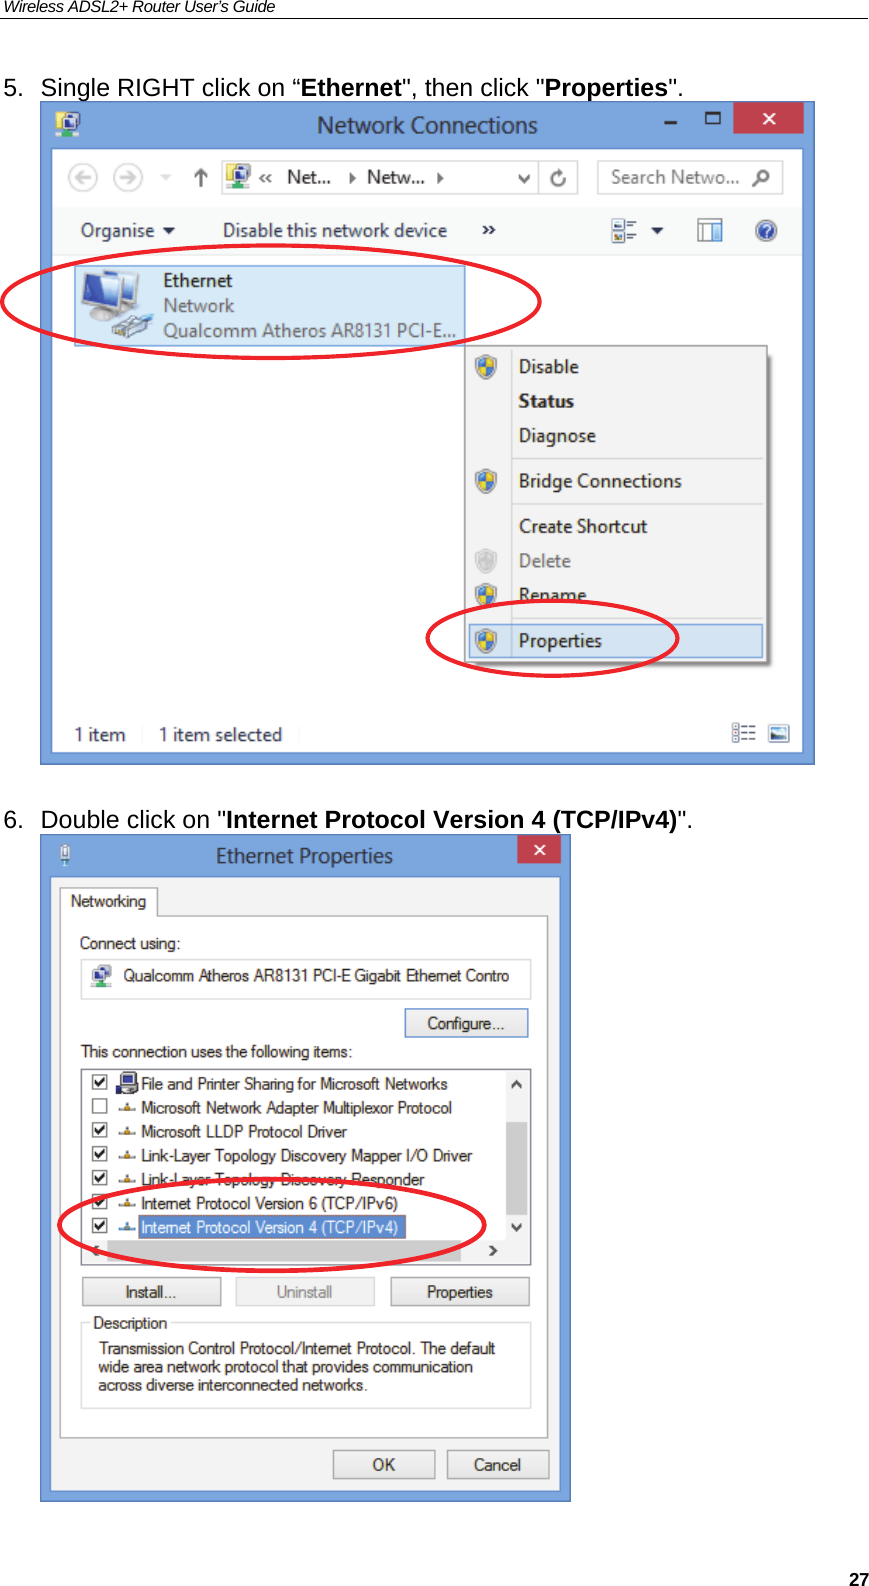 Wireless ADSL2+ Router User’s Guide     275.  Single RIGHT click on “Ethernet&quot;, then click &quot;Properties&quot;.   6.  Double click on &quot;Internet Protocol Version 4 (TCP/IPv4)&quot;.  